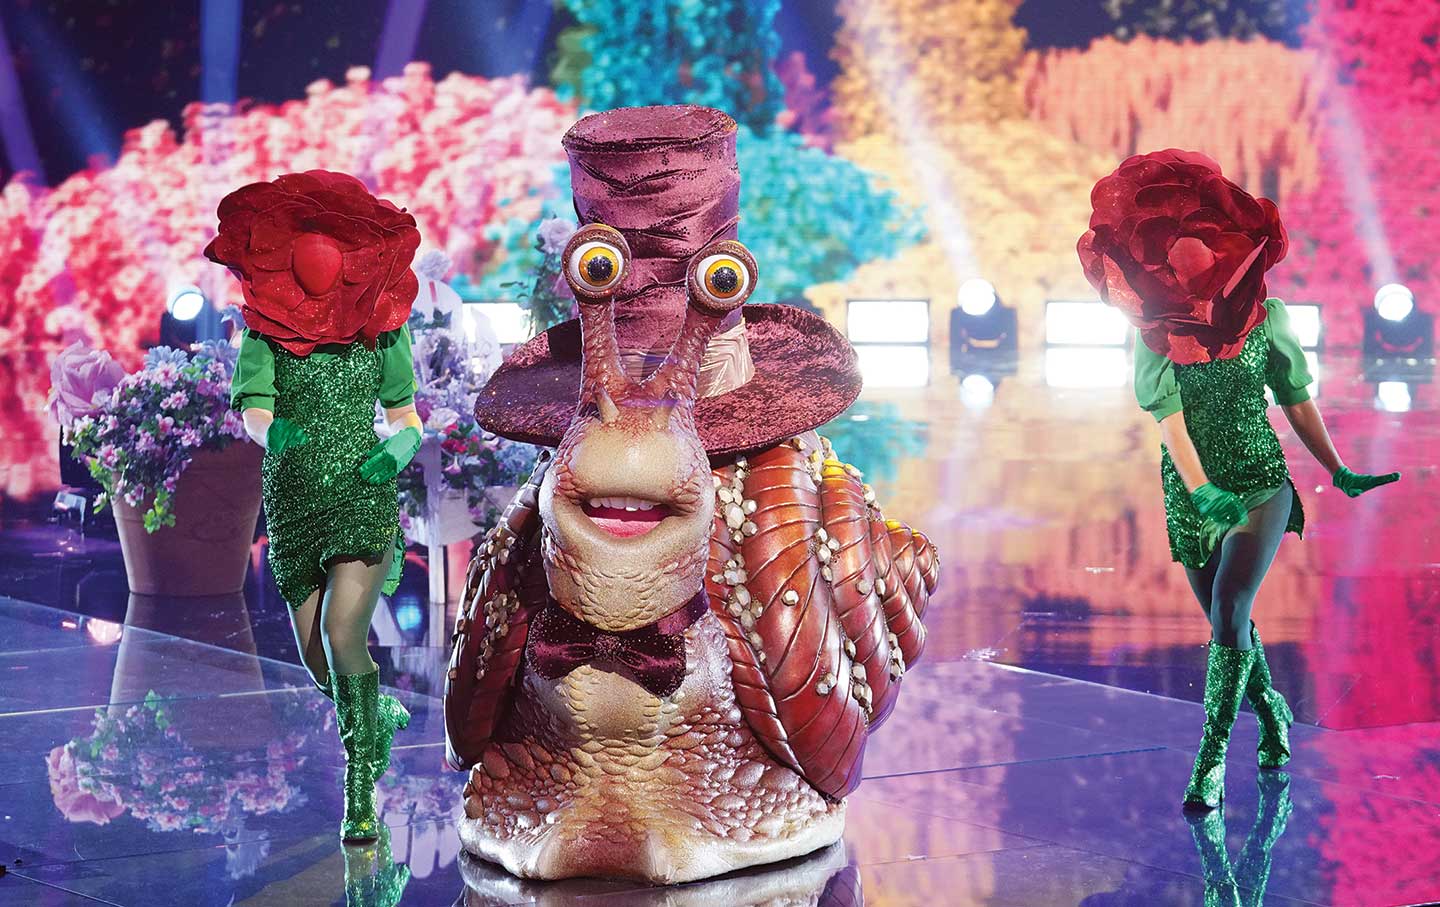 The Surreal Pleasures of ‘The Masked Singer’